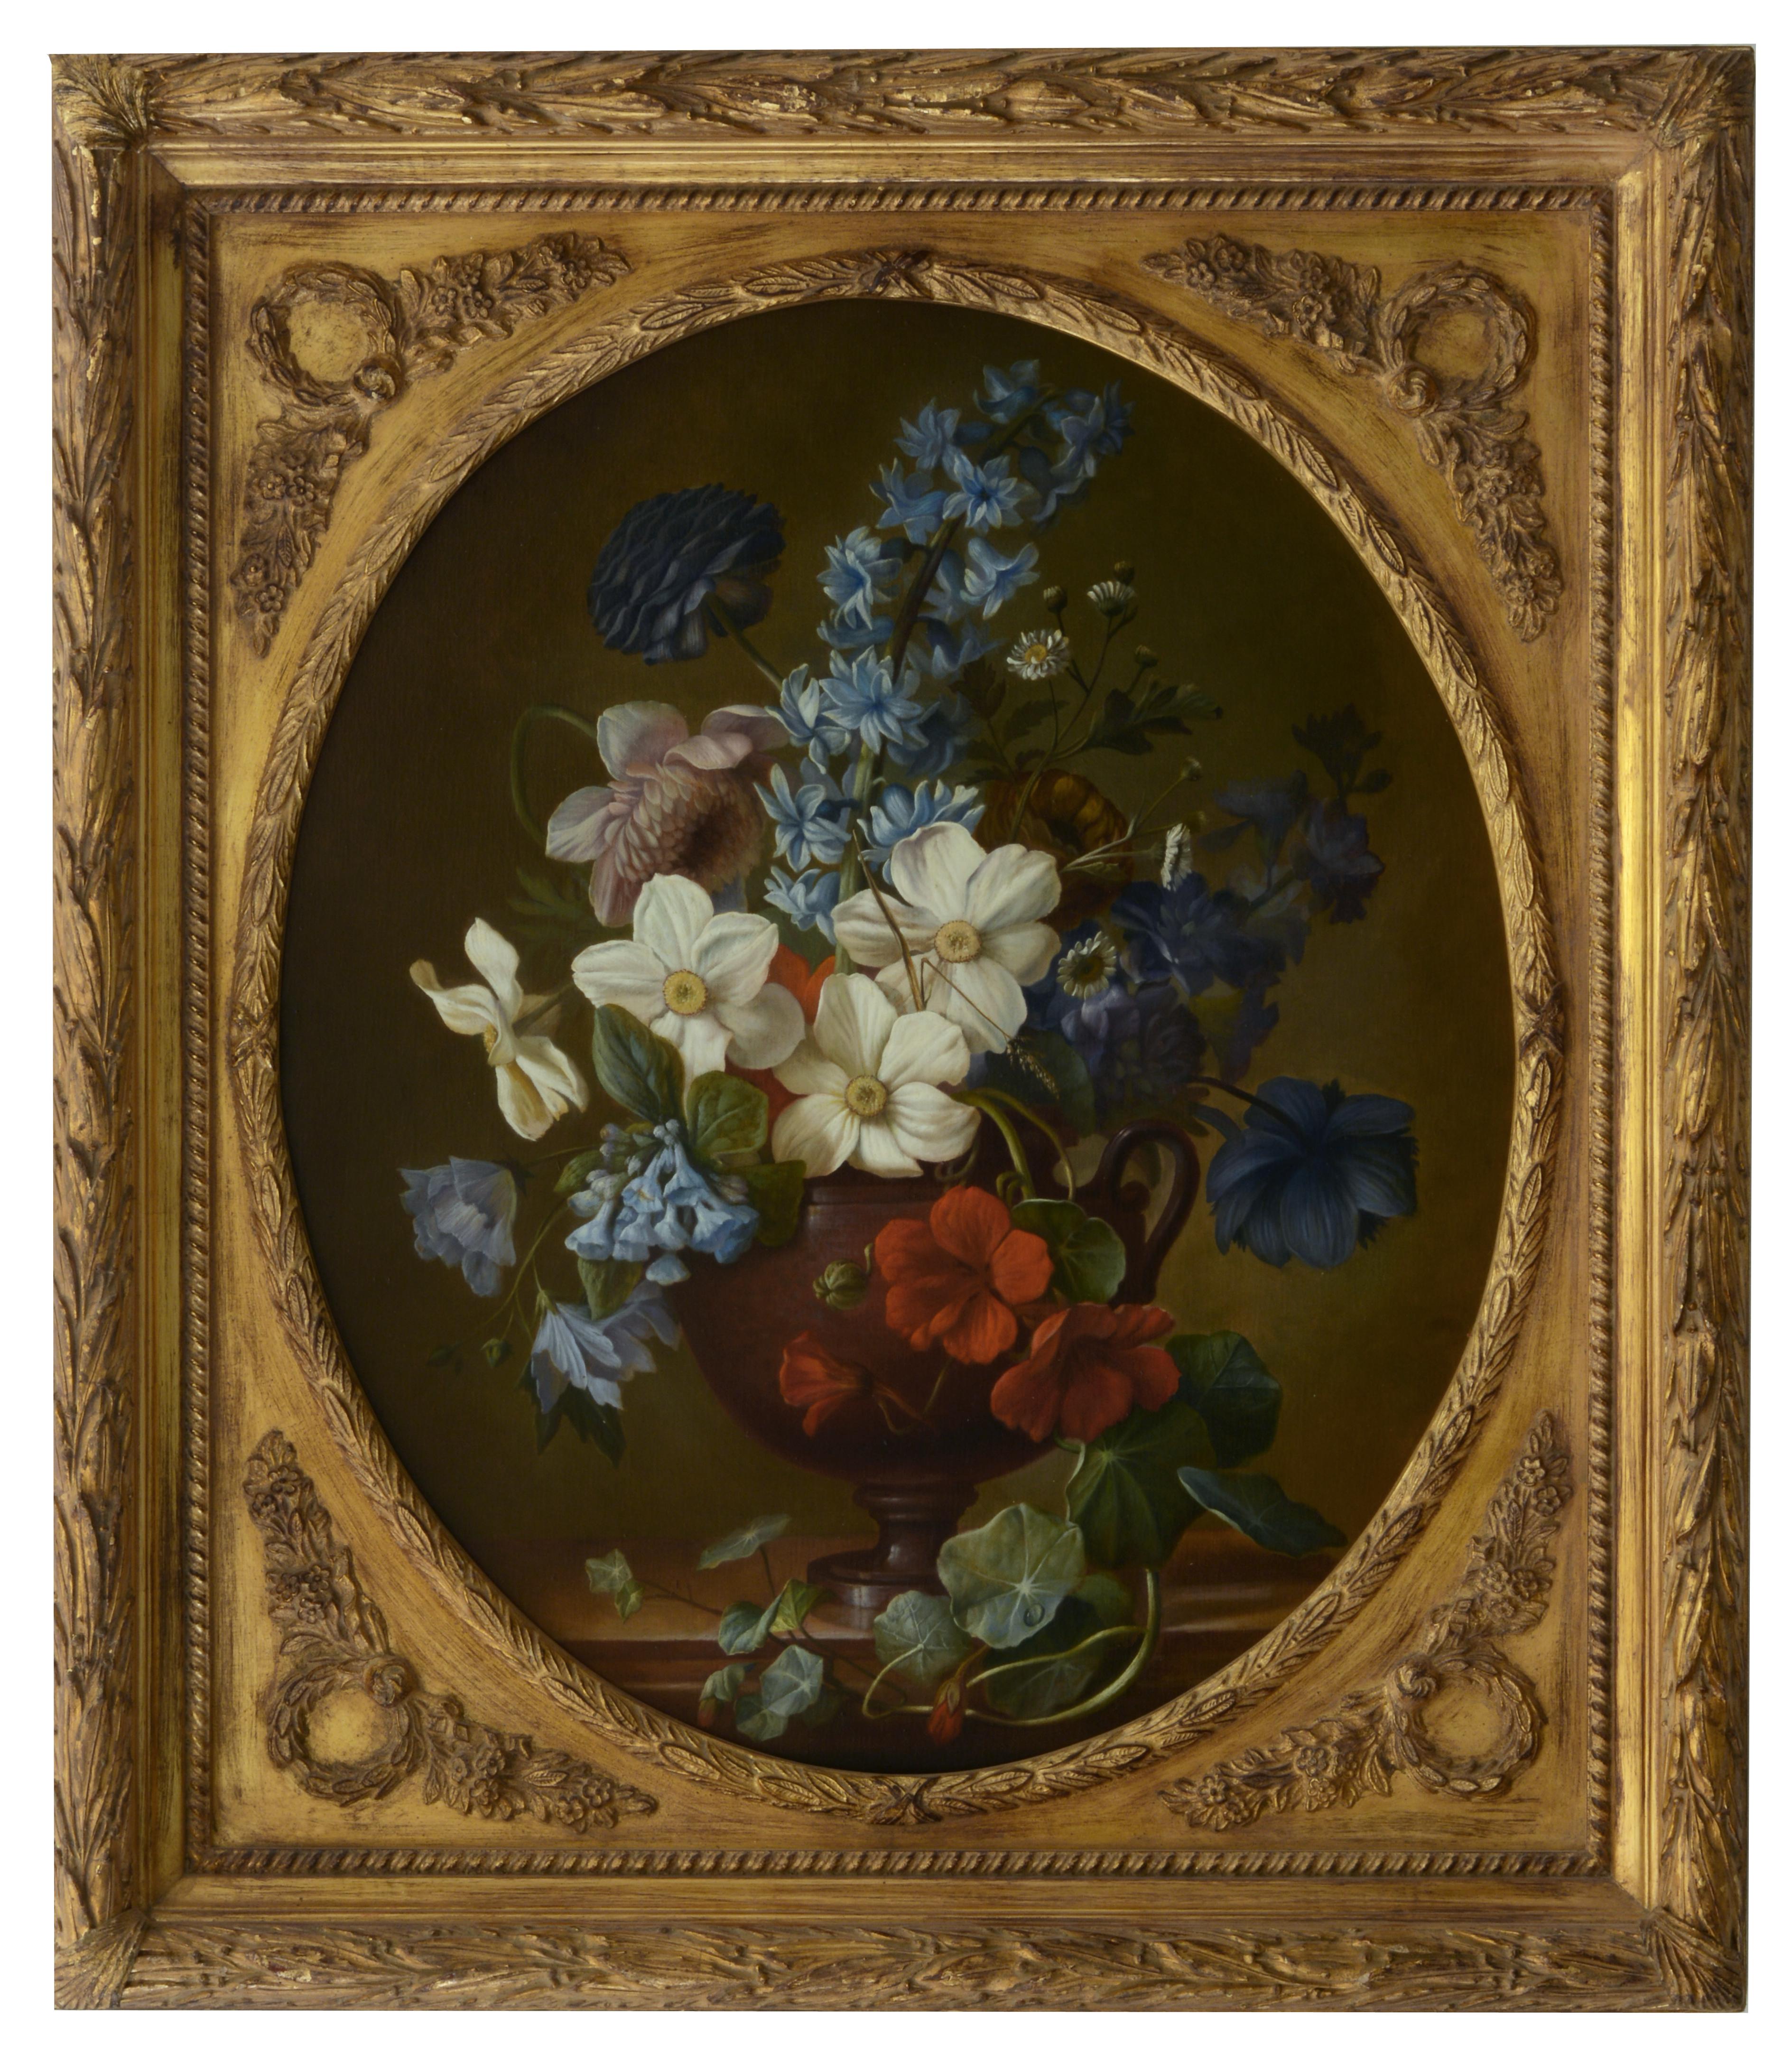 FLOWERS - Oil on canvas painting, cm.60x50, Giovanni Bonetti, 2014, Italy.
Gold leaf gilded wooden frame cm.77x66